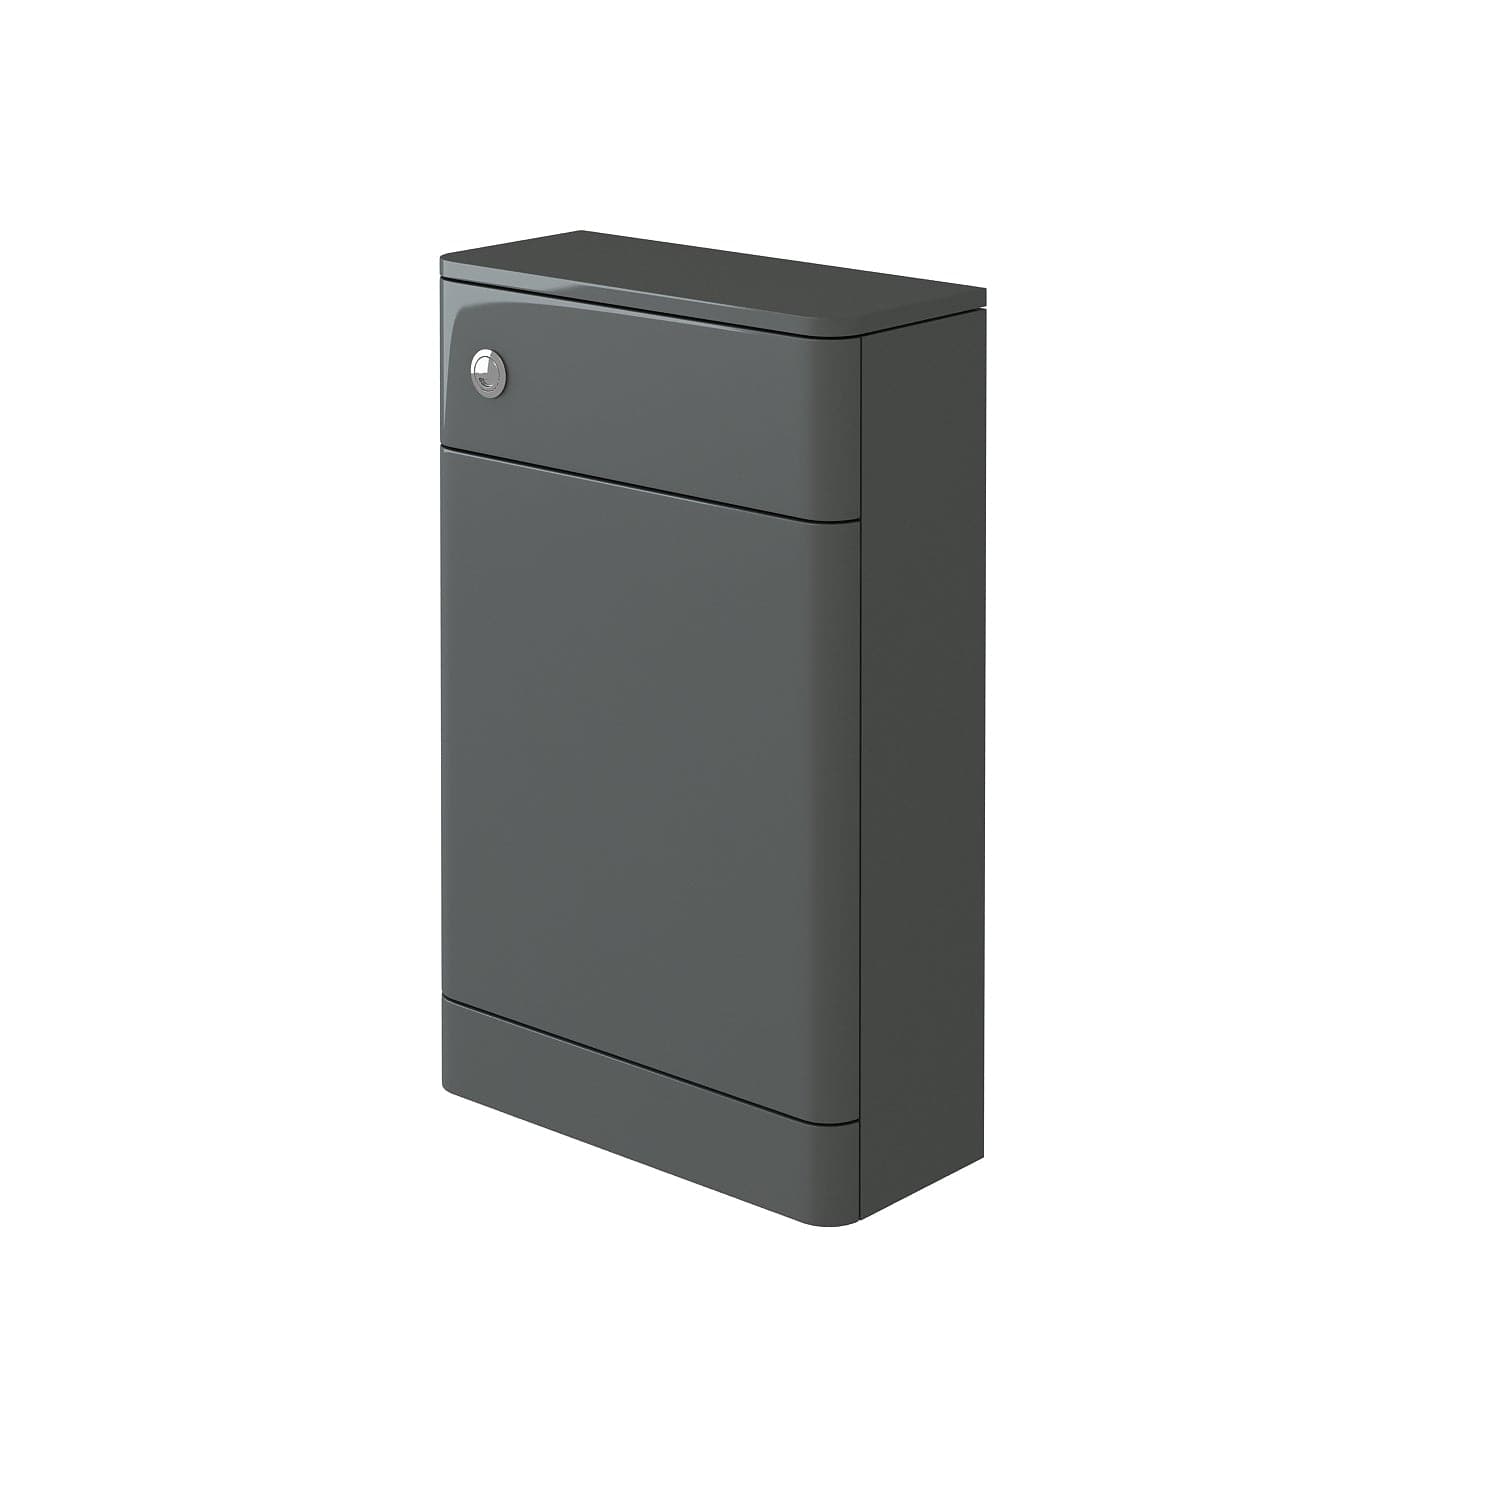 Denver WC Unit - 500mm x 217mm - Anthracite Grey Gloss (Flat Pack)